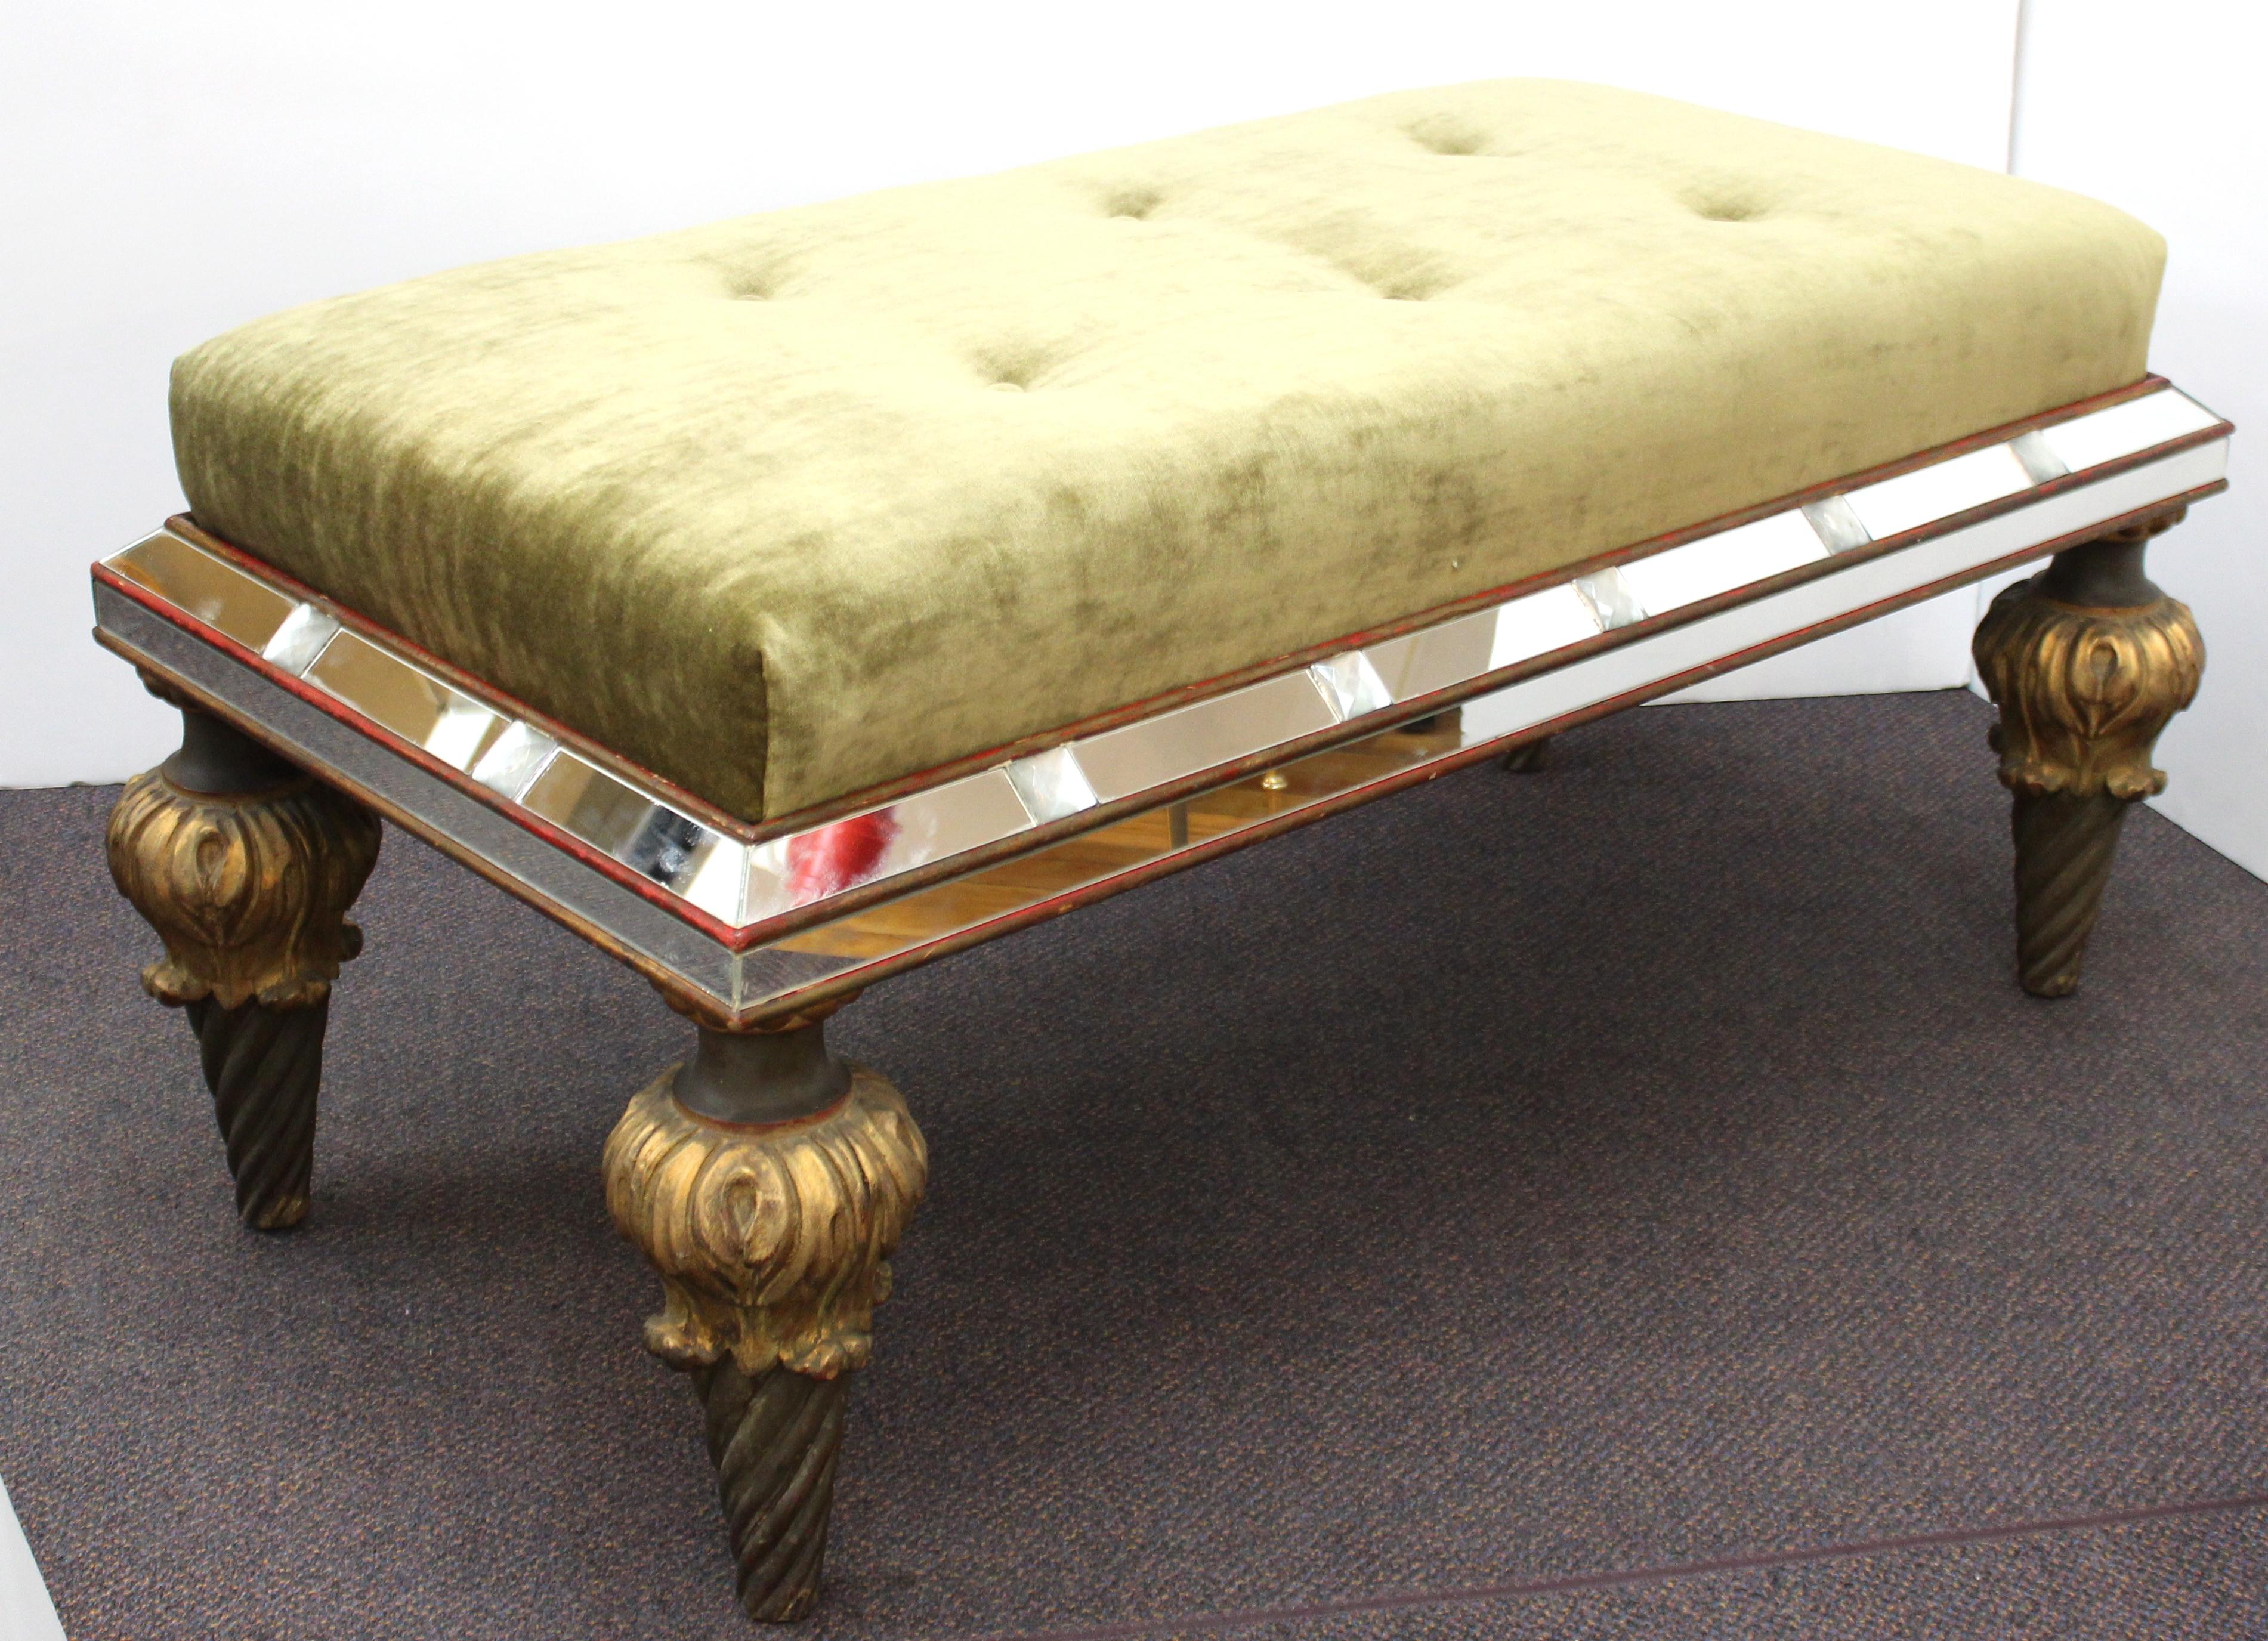 Italian Hollywood Regency bench with mirrored frame and hand carved, partially gilt and painted legs and recently reupholstered seat in light olive-green linen velvet. The piece was made during the 1940s in Italy and is in great vintage condition.